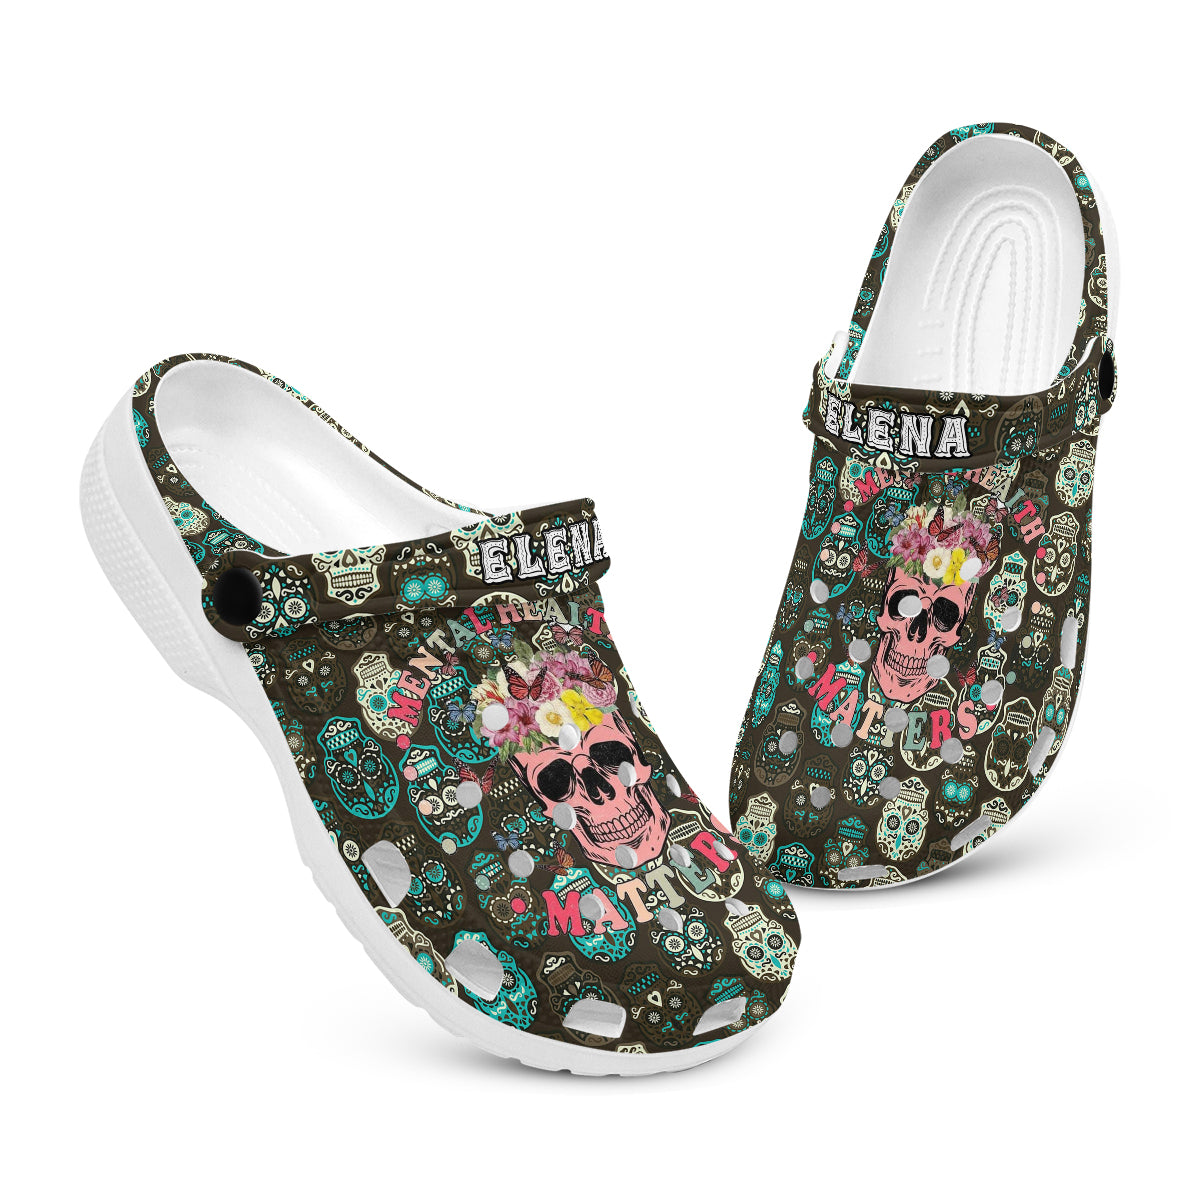 EShoes Personalized Clogs, Mental Health Matters, Custom Name Clogs.